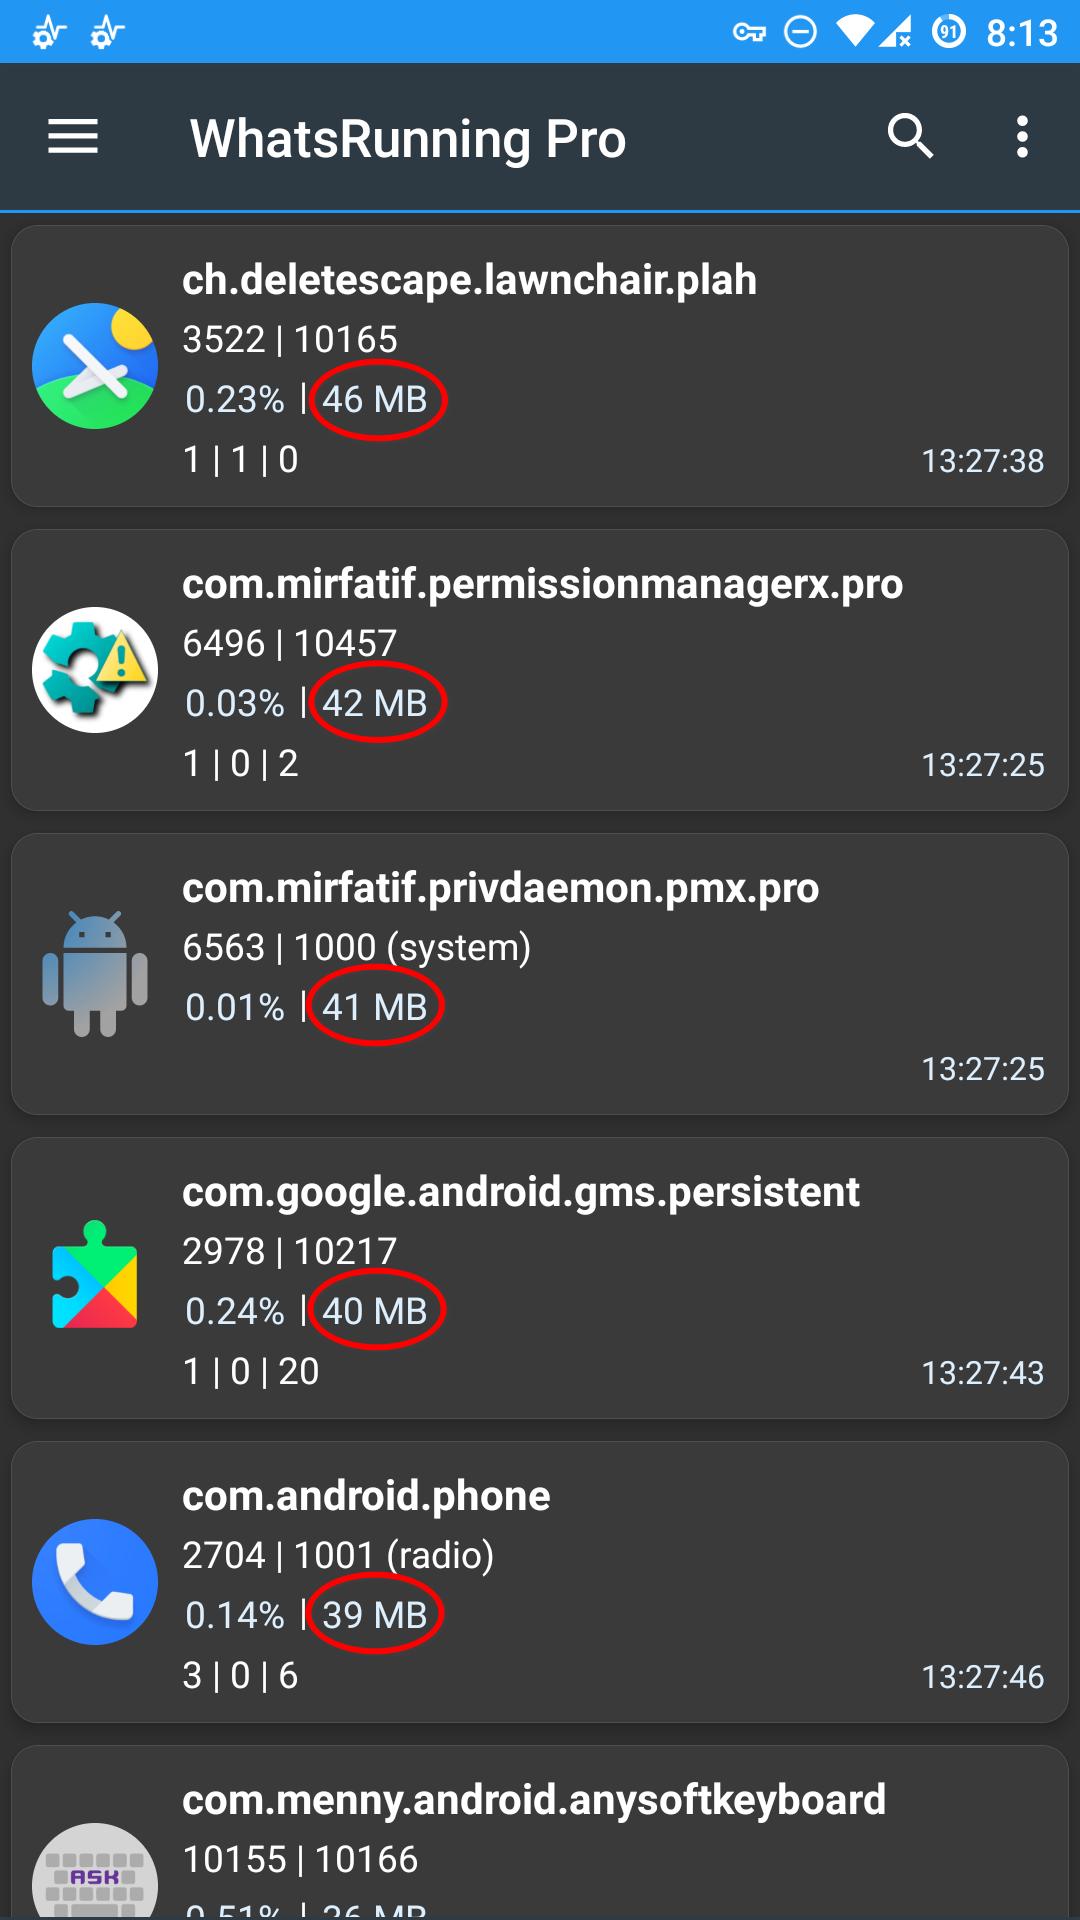 Android RAM usage per process